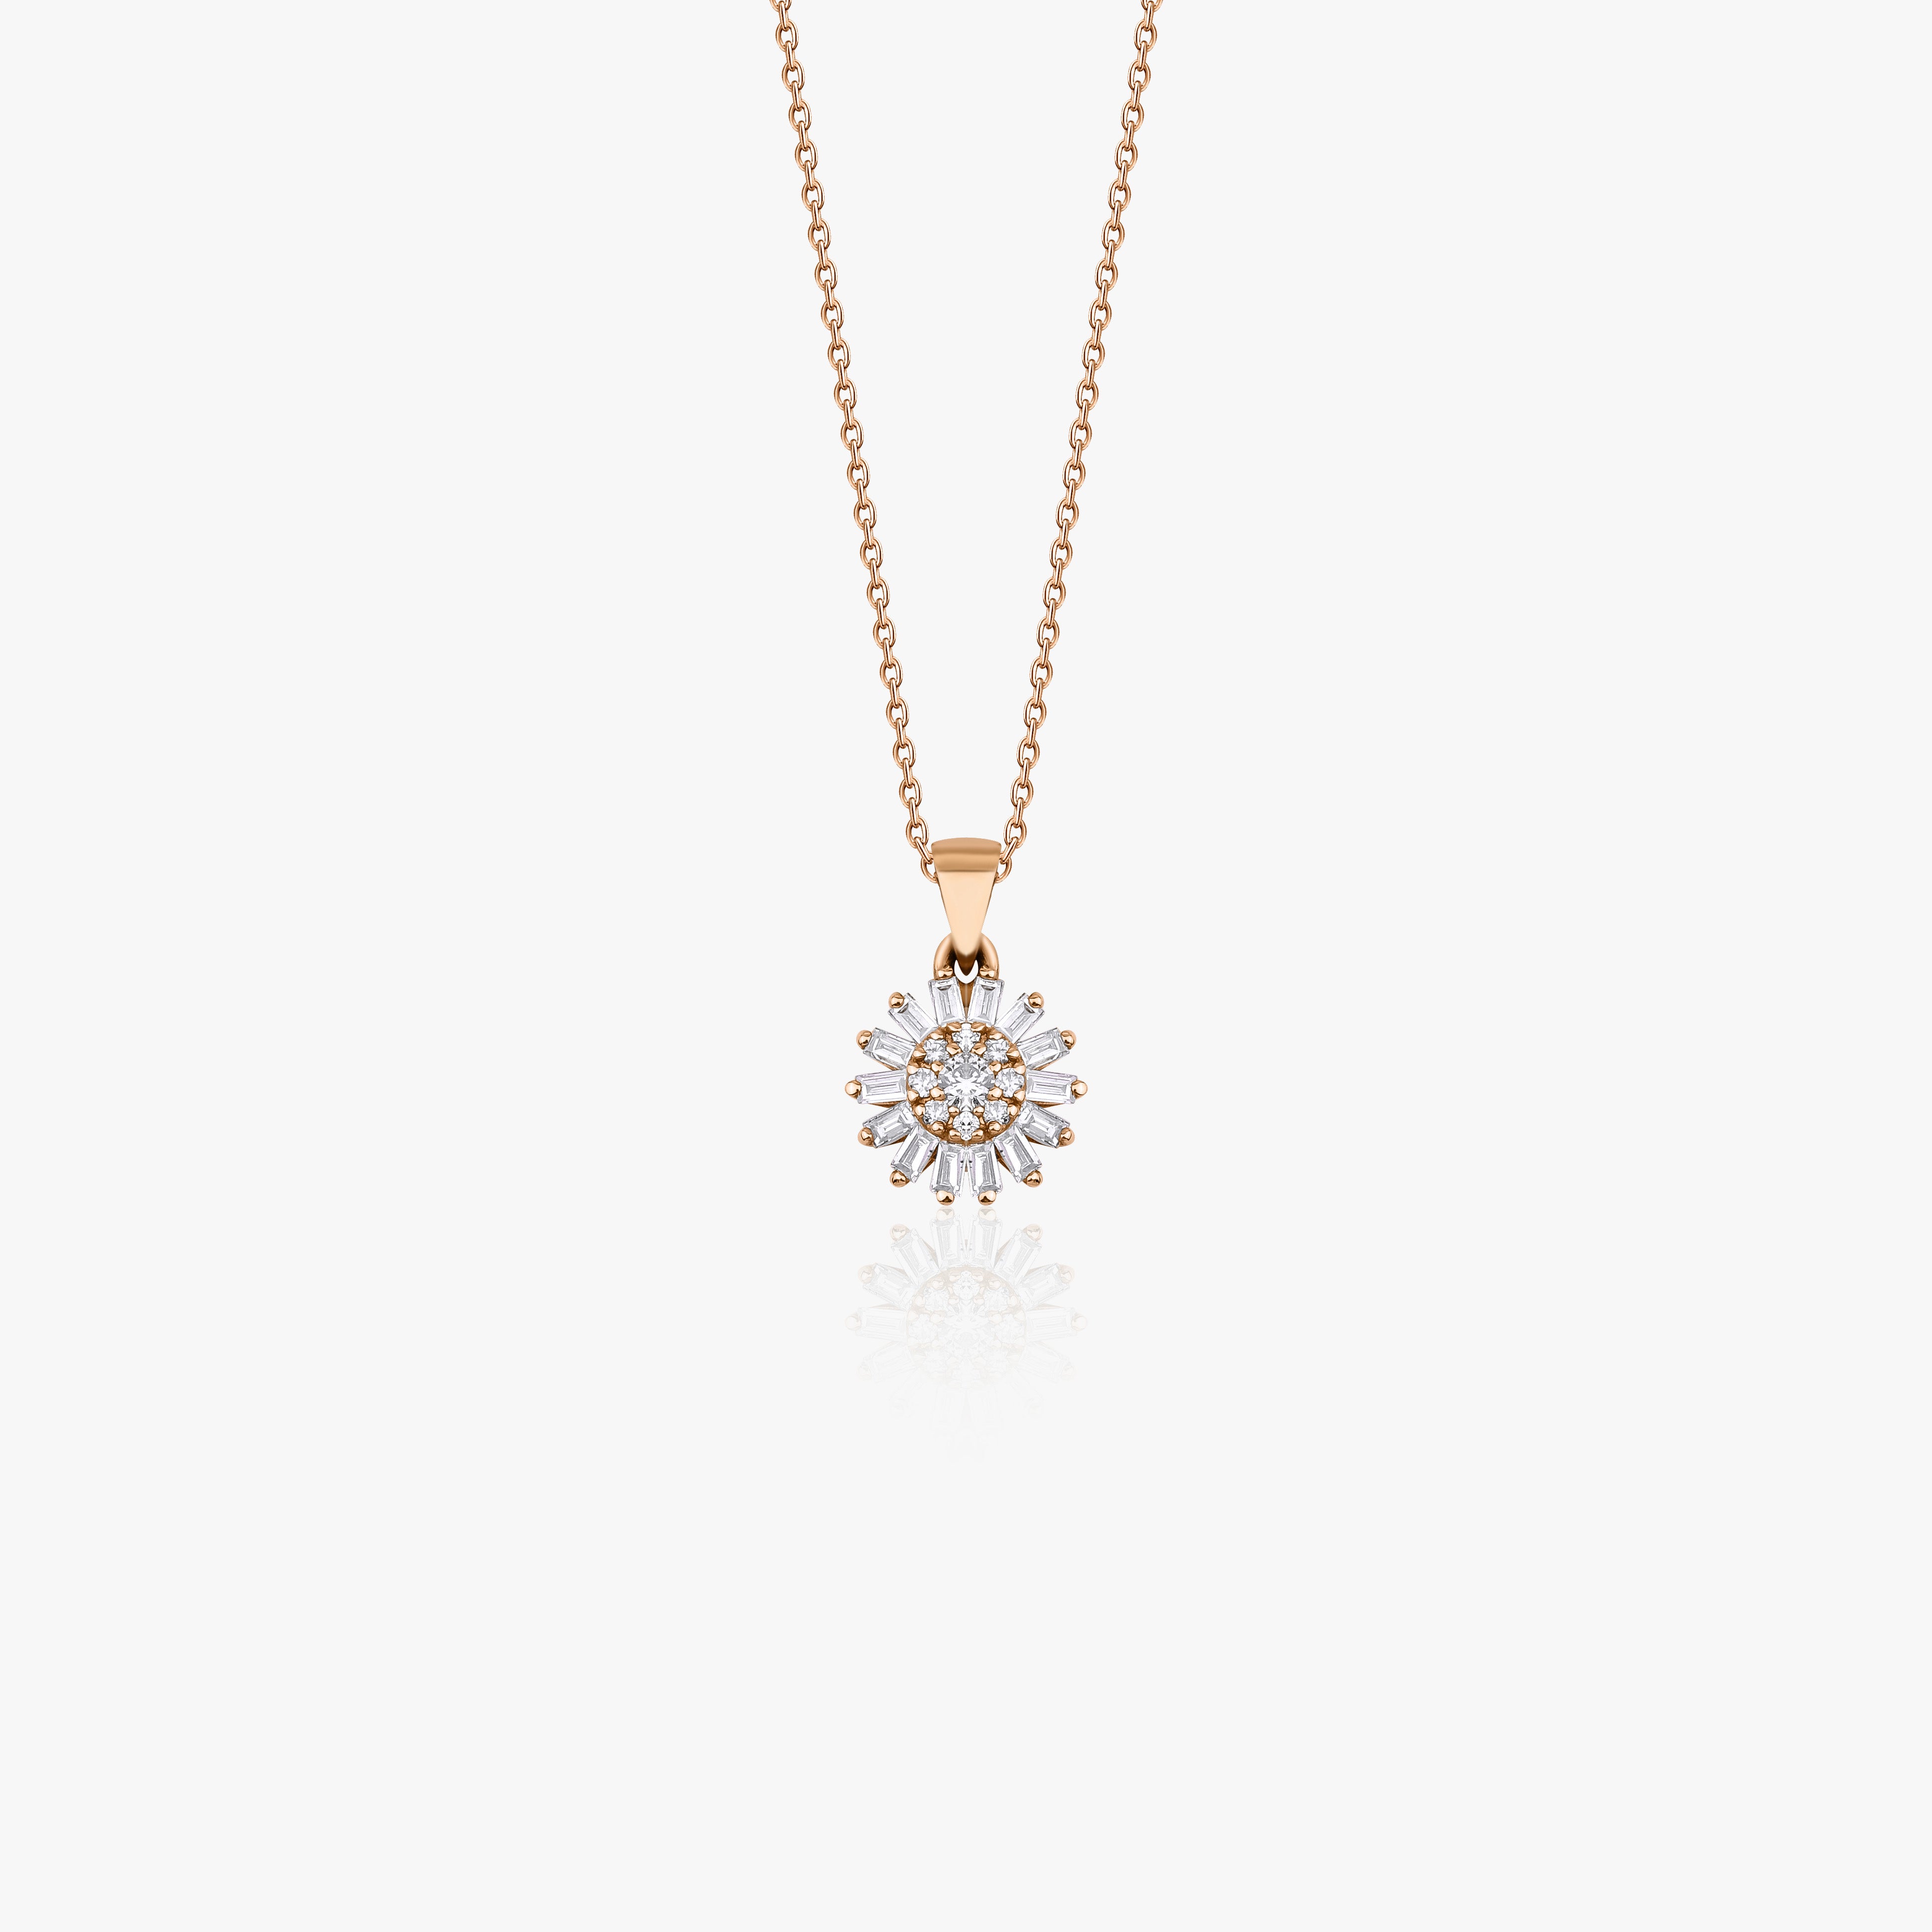 Diamond Flower Necklace Available in 14K and 18K Gold